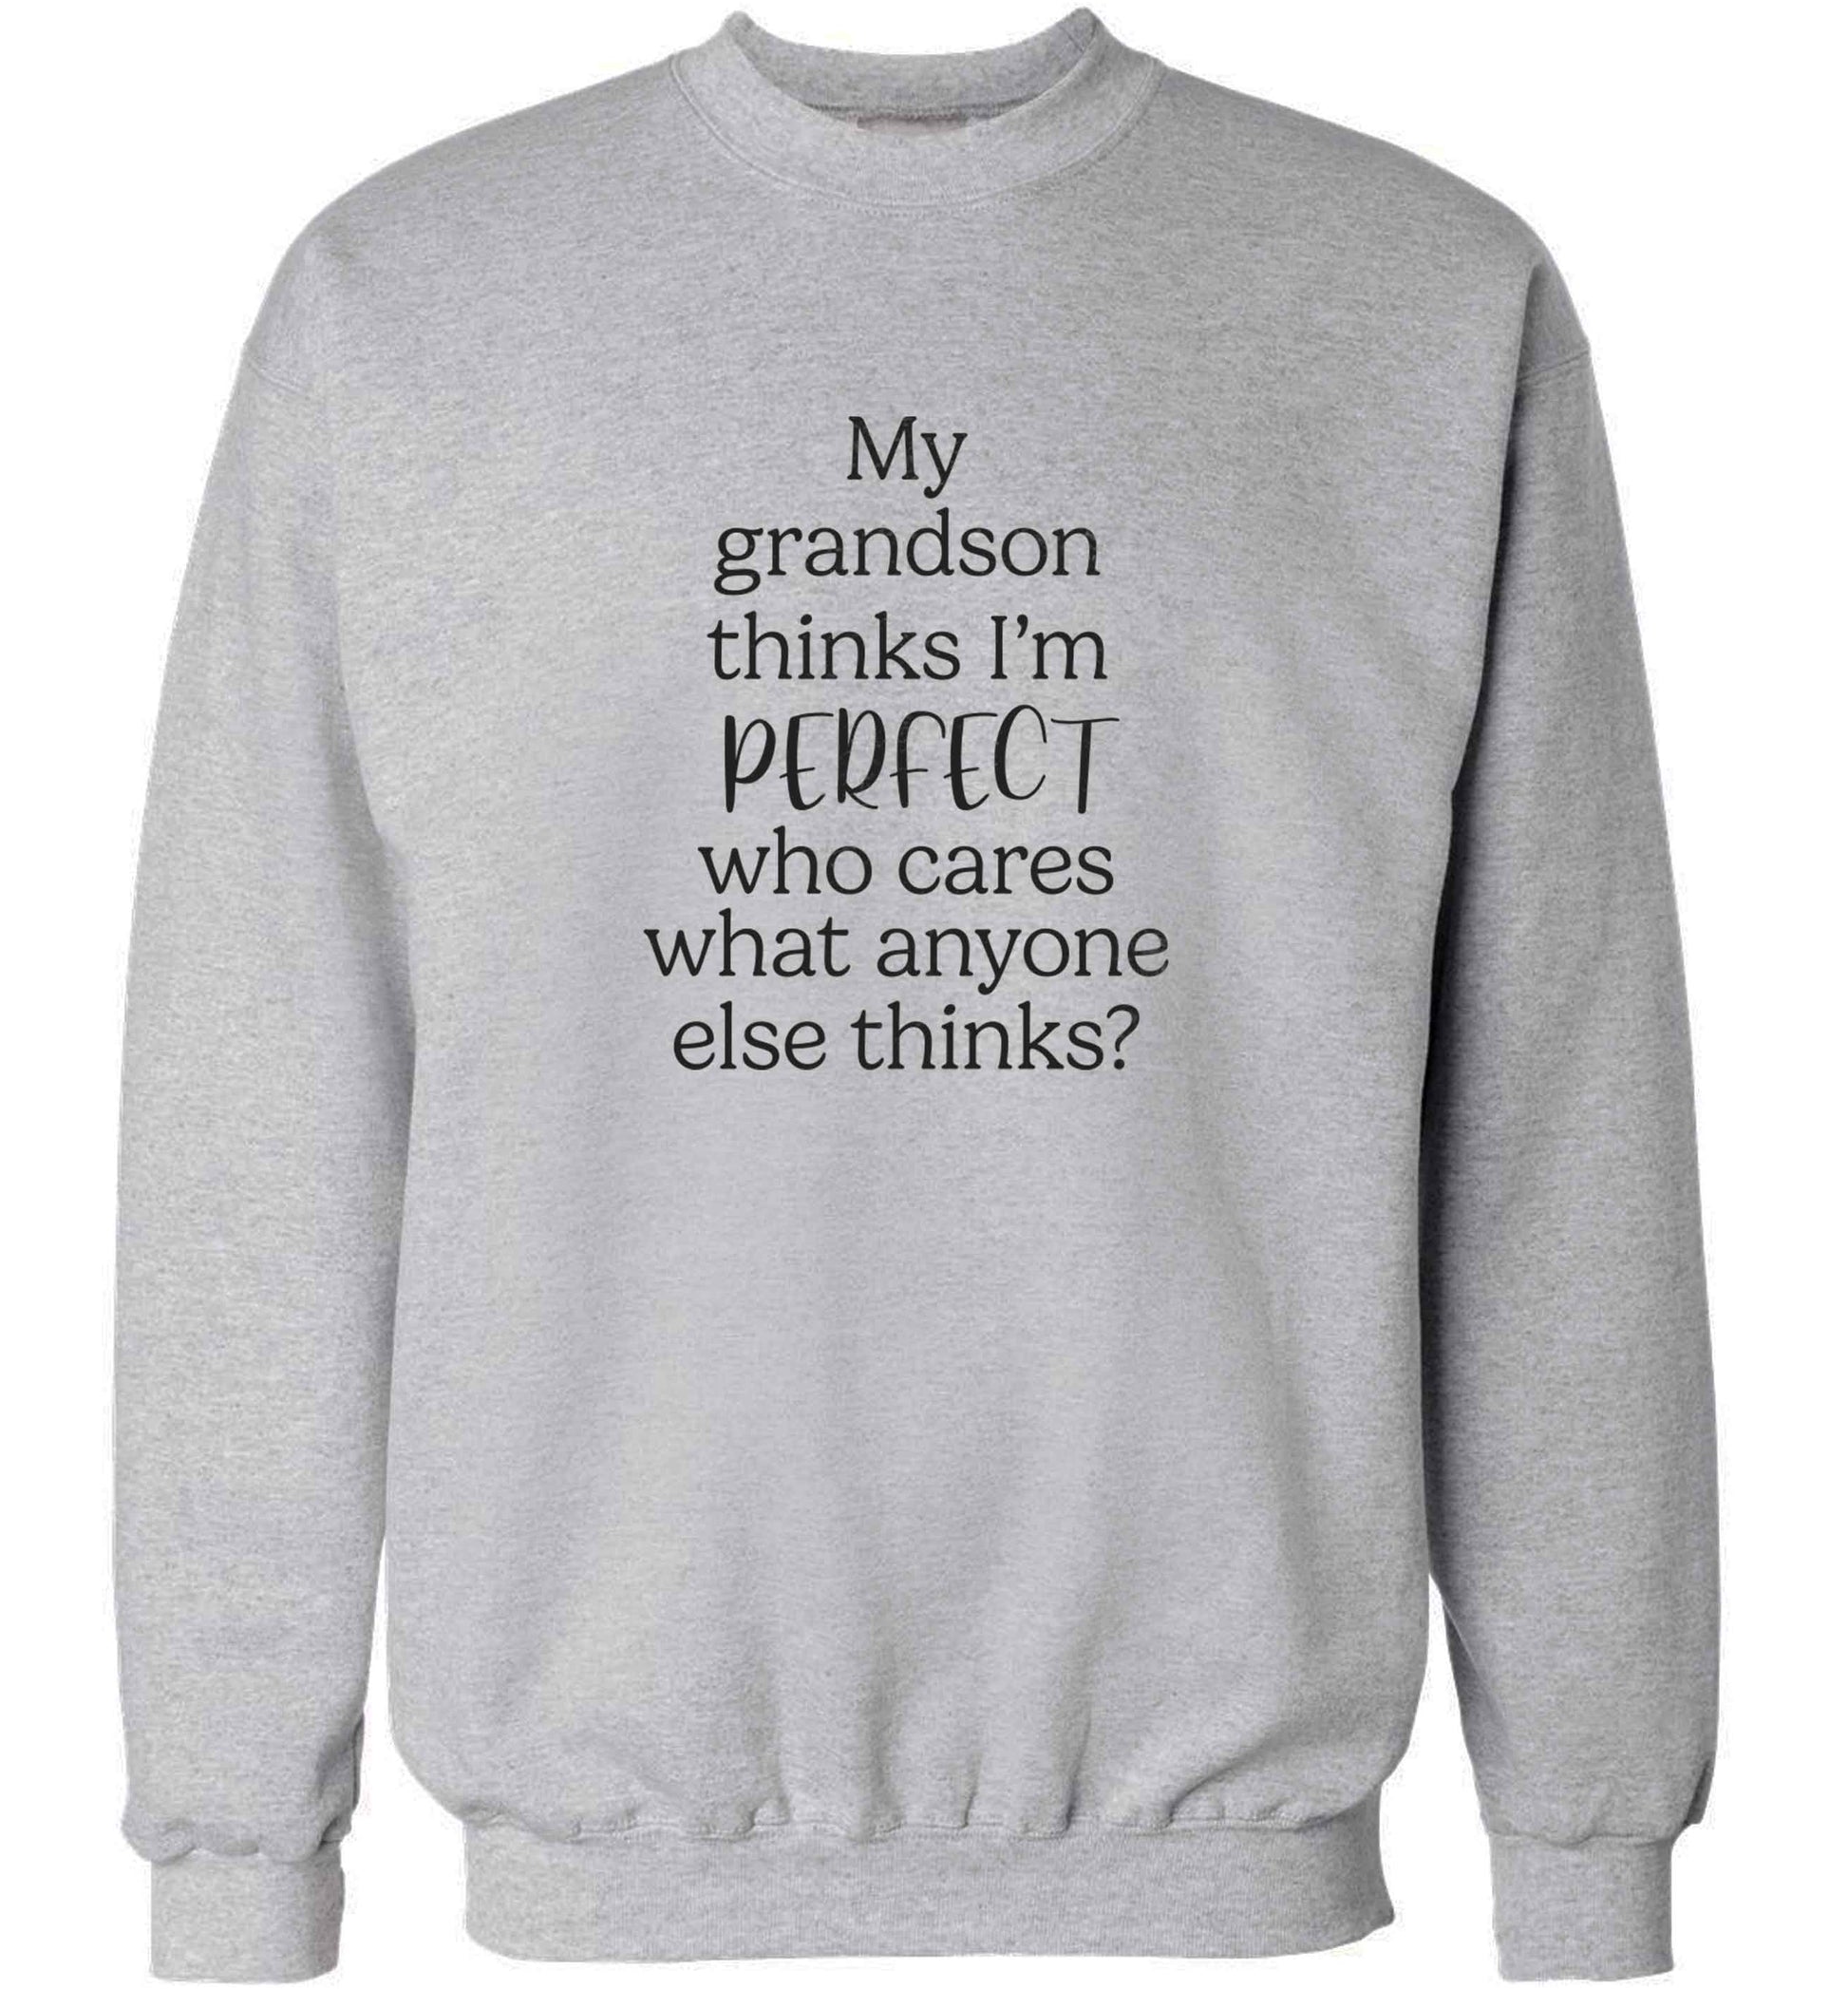 My Grandson thinks I'm perfect who cares what anyone else thinks? adult's unisex grey sweater 2XL